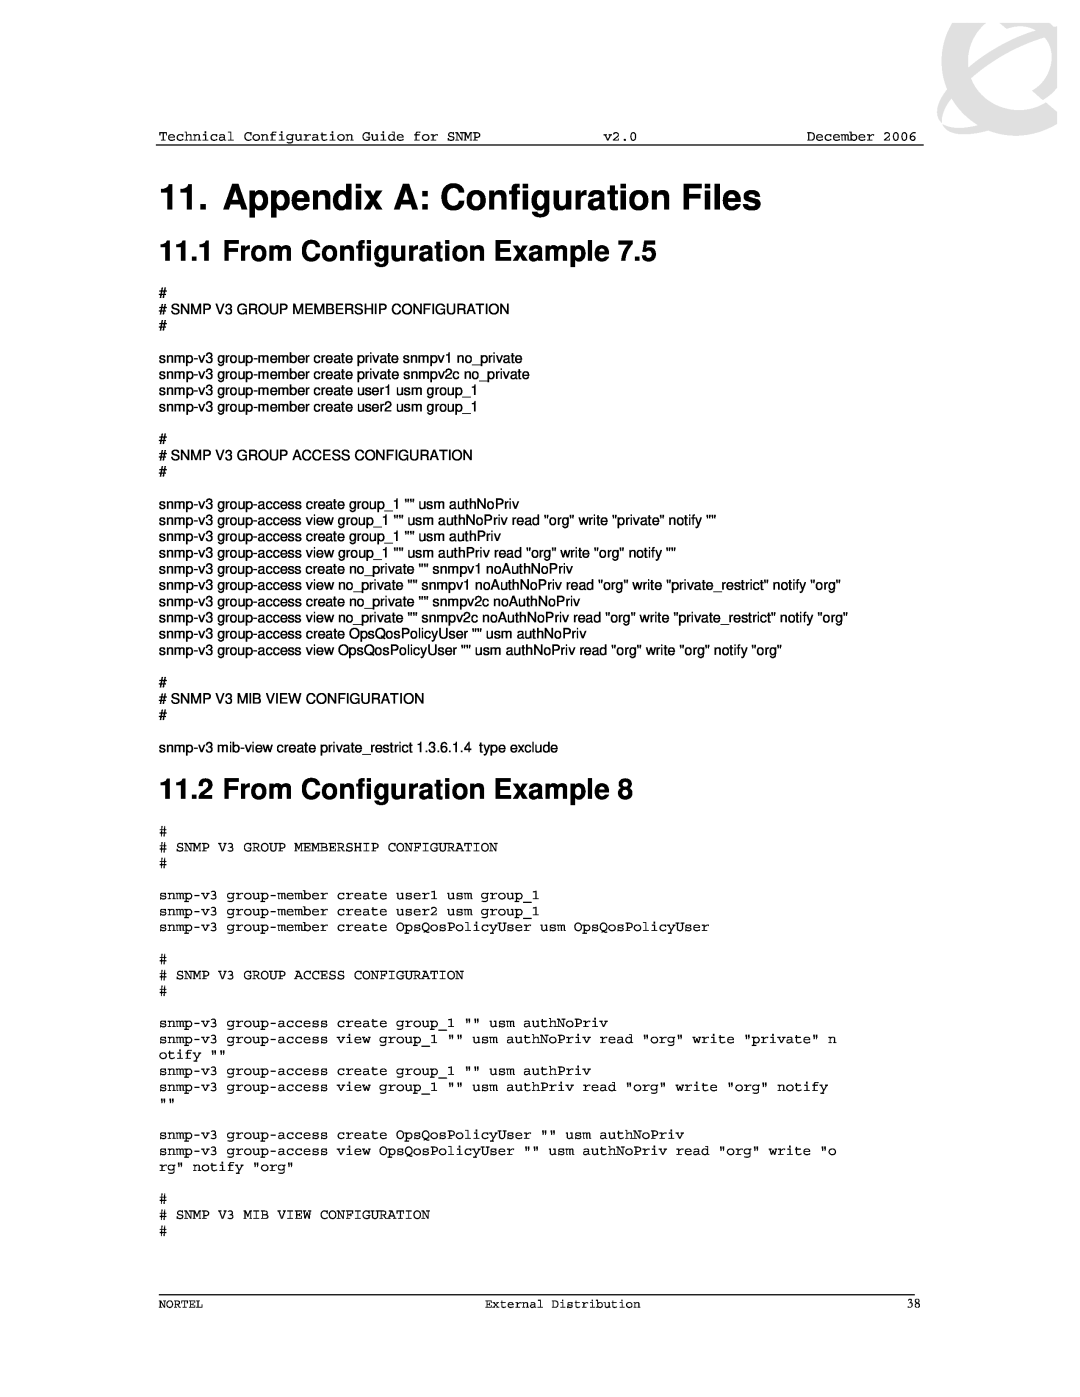 Nortel Networks 8600 manual Appendix A Configuration Files, From Configuration Example 